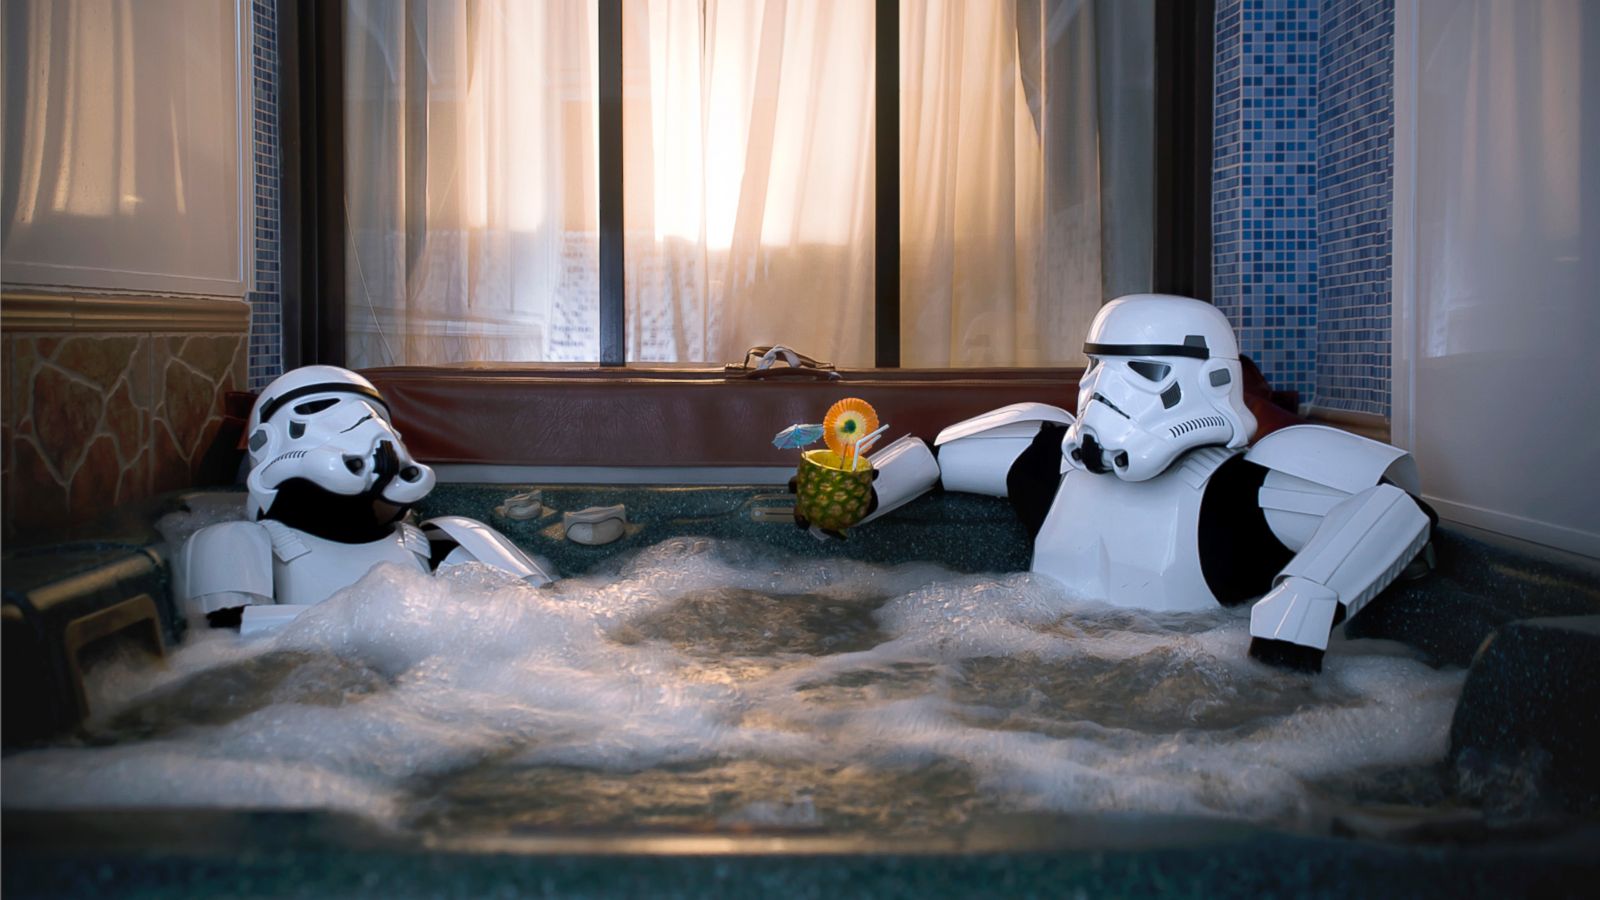 View Stormtroopers relax in a hot tub. pictures and other A Day in the Life...